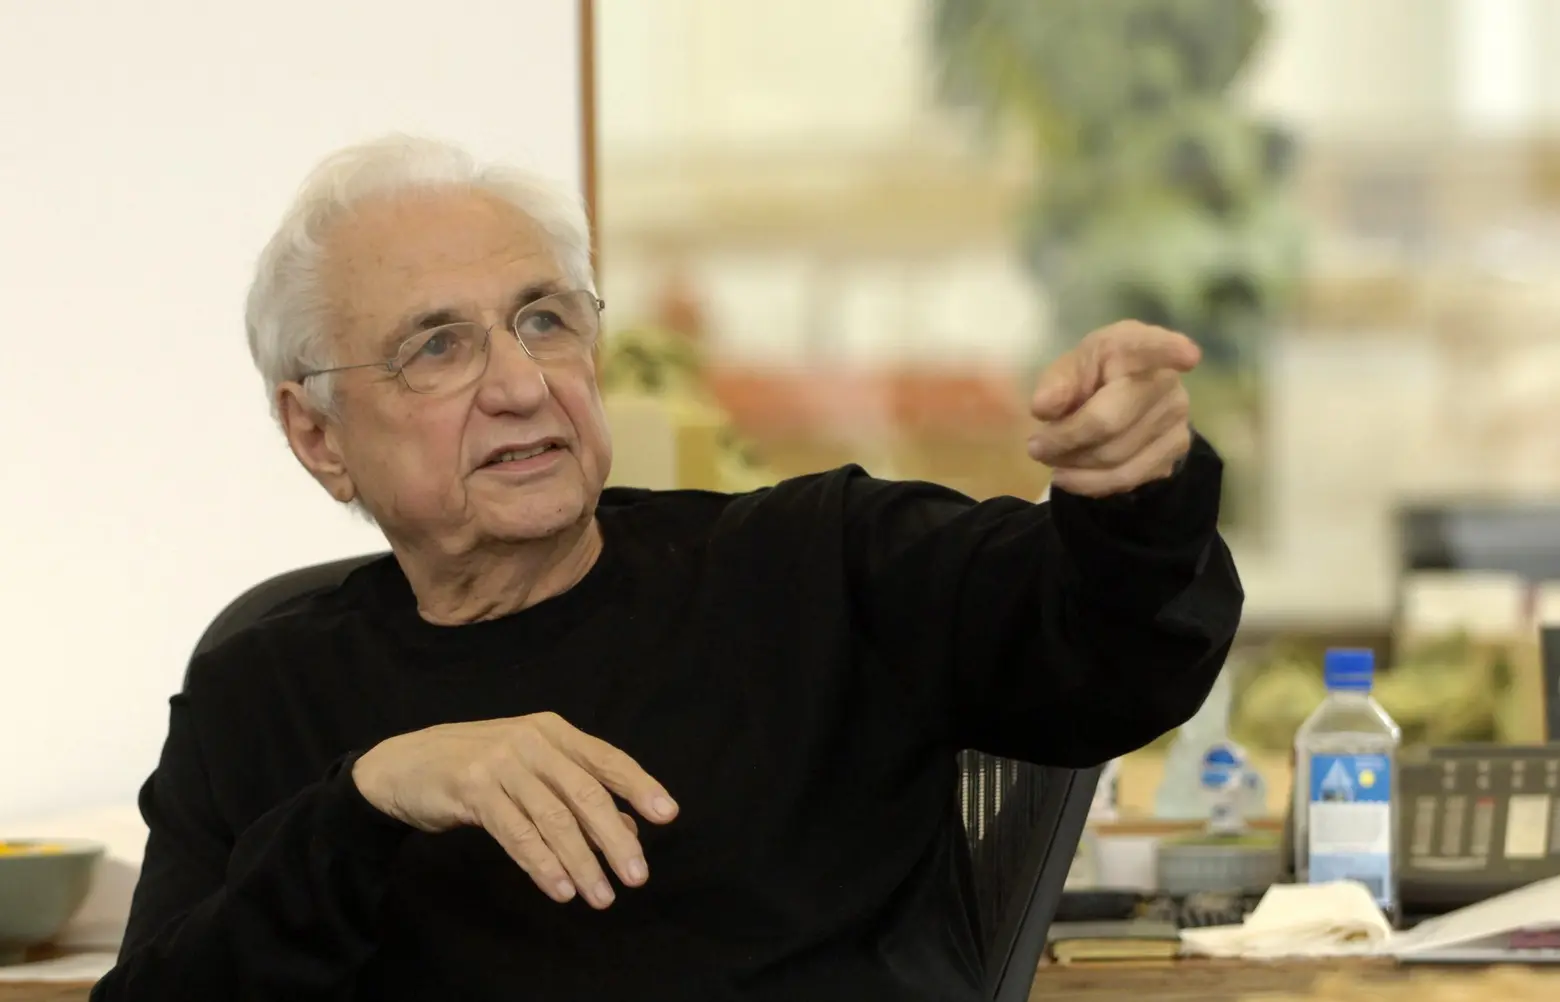 Starchitect Frank Gehry may self-exile to France now that Trump’s been elected